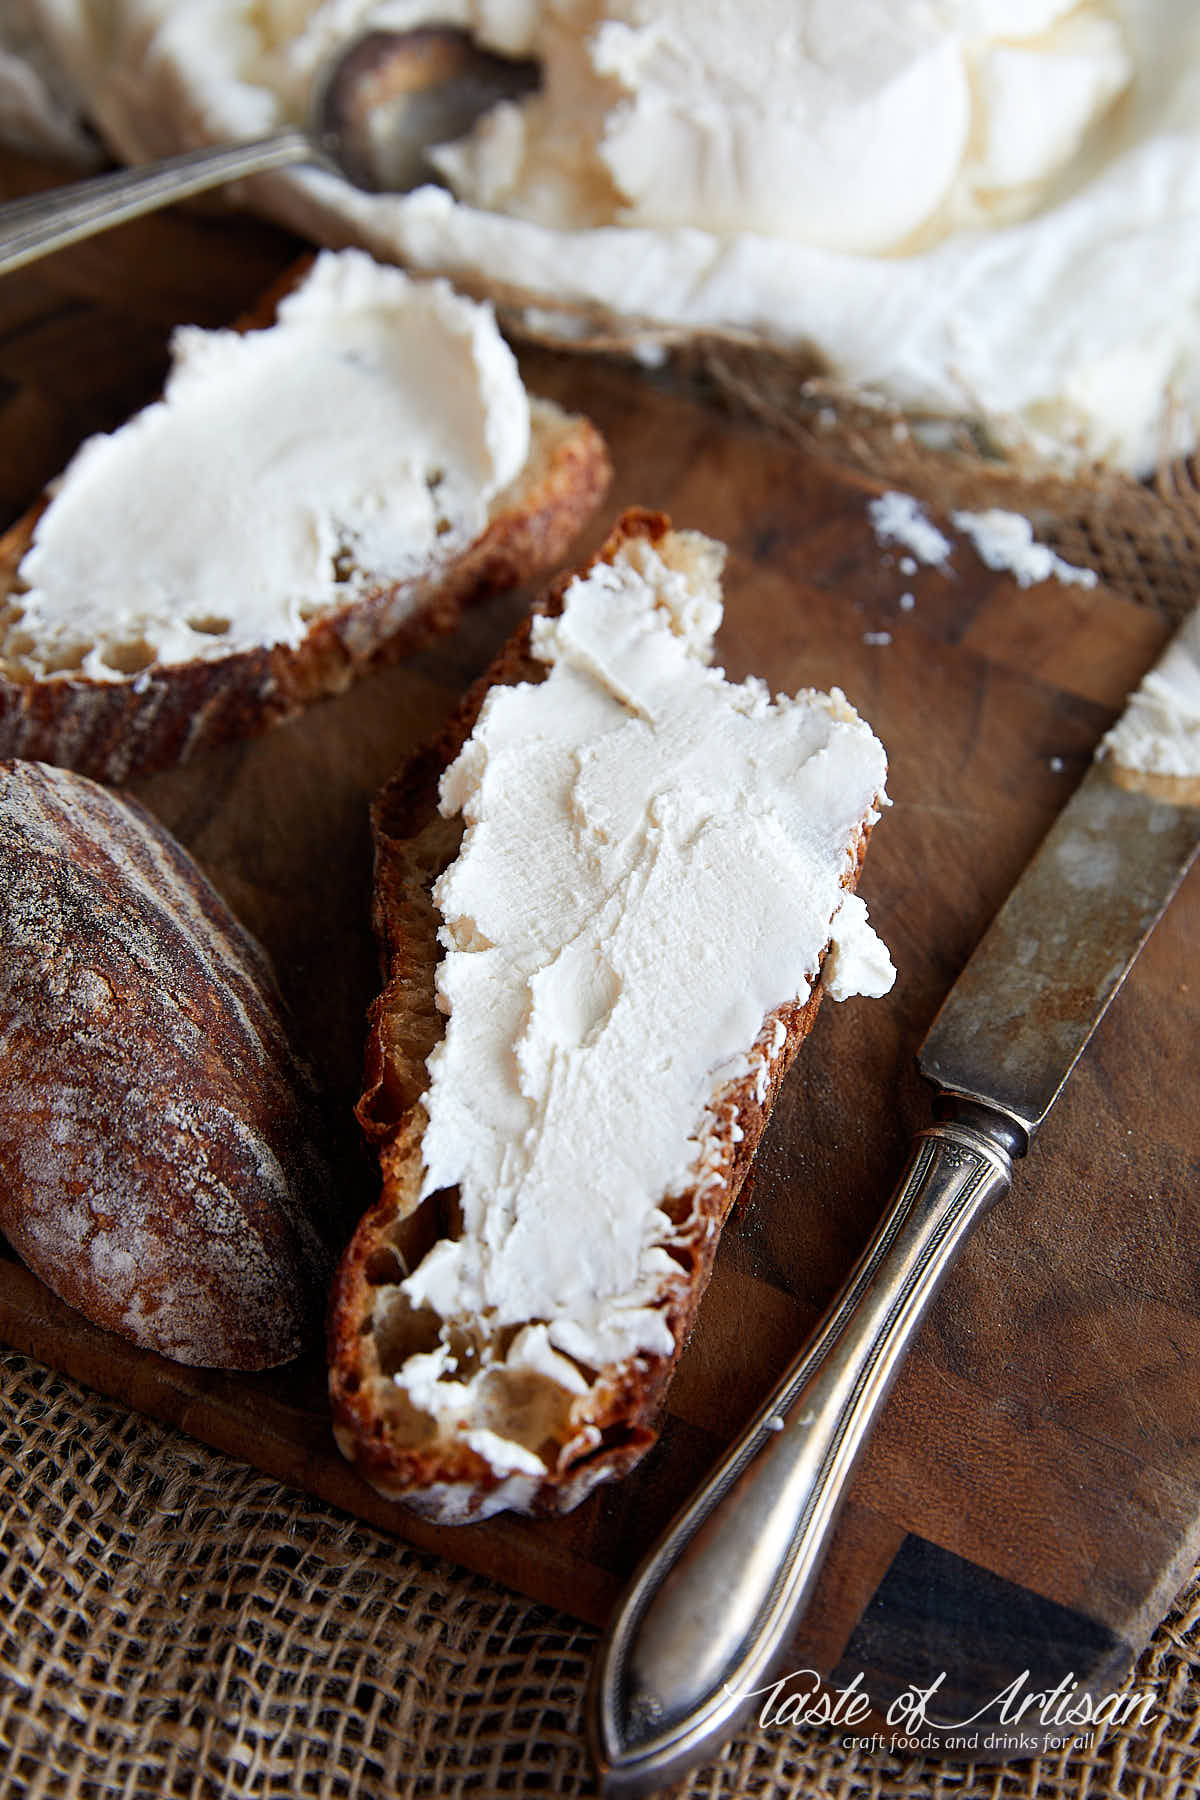 Slices of sourdough bread smeared with cream cheese on a cutting board, a bowl with cream cheese on the background.